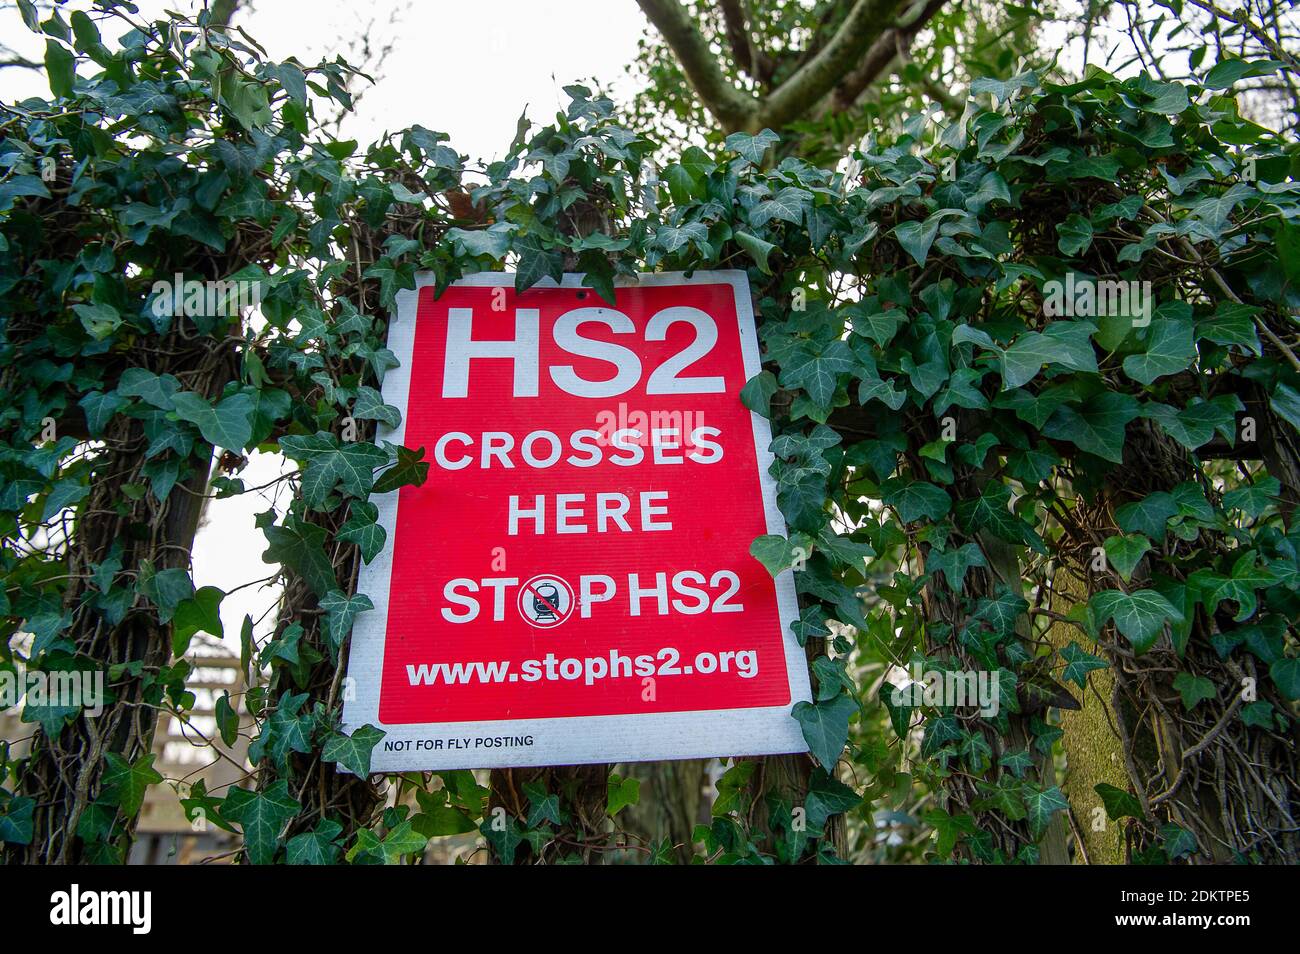 Wendover, Buckinghamshire, UK. 15th December, 2020. Stop HS2 signs outside the camp. Stop HS2 activists are busy at their Wendover Active Resistance Camp getting ready for the winter and building more tree houses. Their camp is situated in the direct route of the HS2 High Speed Rail link from London to Birmingham. The activists living at the camp are a collective of autonomous individuals with the aim of protecting the environment and wildlife. The controversial and over budget HS2 rail link puts 693 wildlife areas, 33 SSSIs and 108 ancient woodlands at risk. Credit: Maureen McLean/Alamy Stock Photo